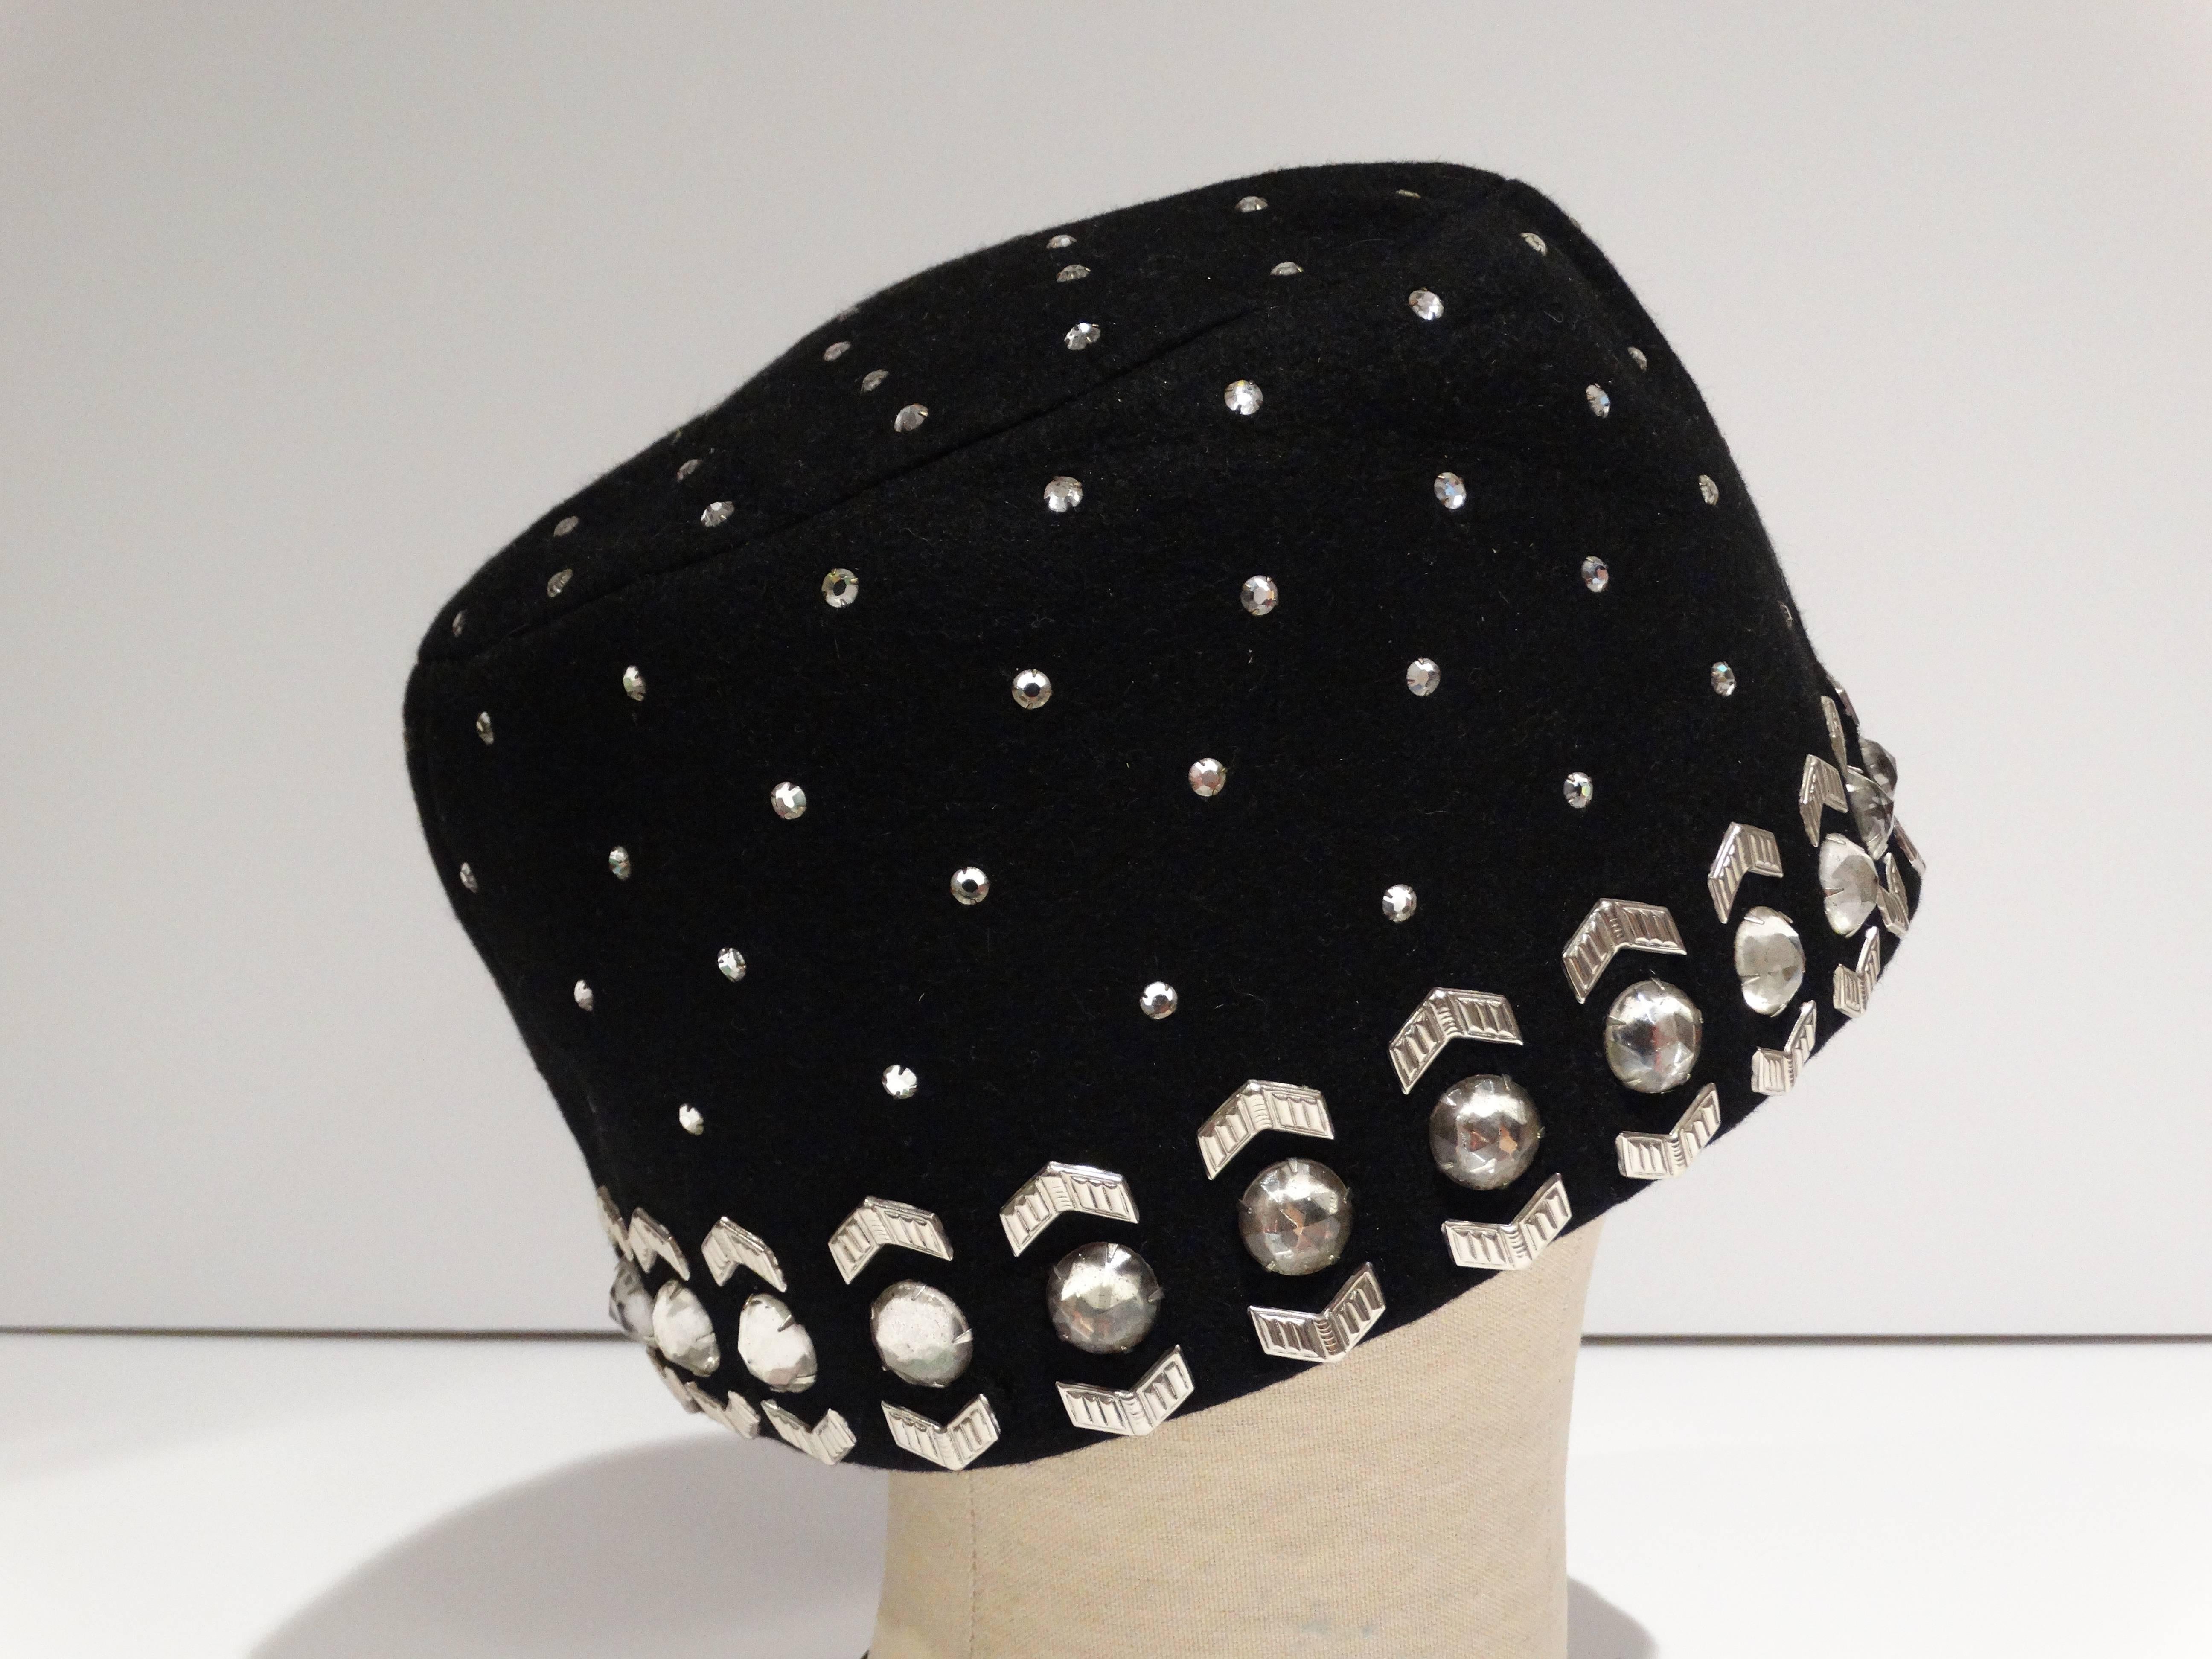 A wonderful Yves Saint Laurent black felt Fez style turban/ Pillbox Hat.., circa 1960's from the fabulous YSL! Rhinestones throughout- large and small, plus metal chevron decorative pieces. The large rhinestones measure 1/2